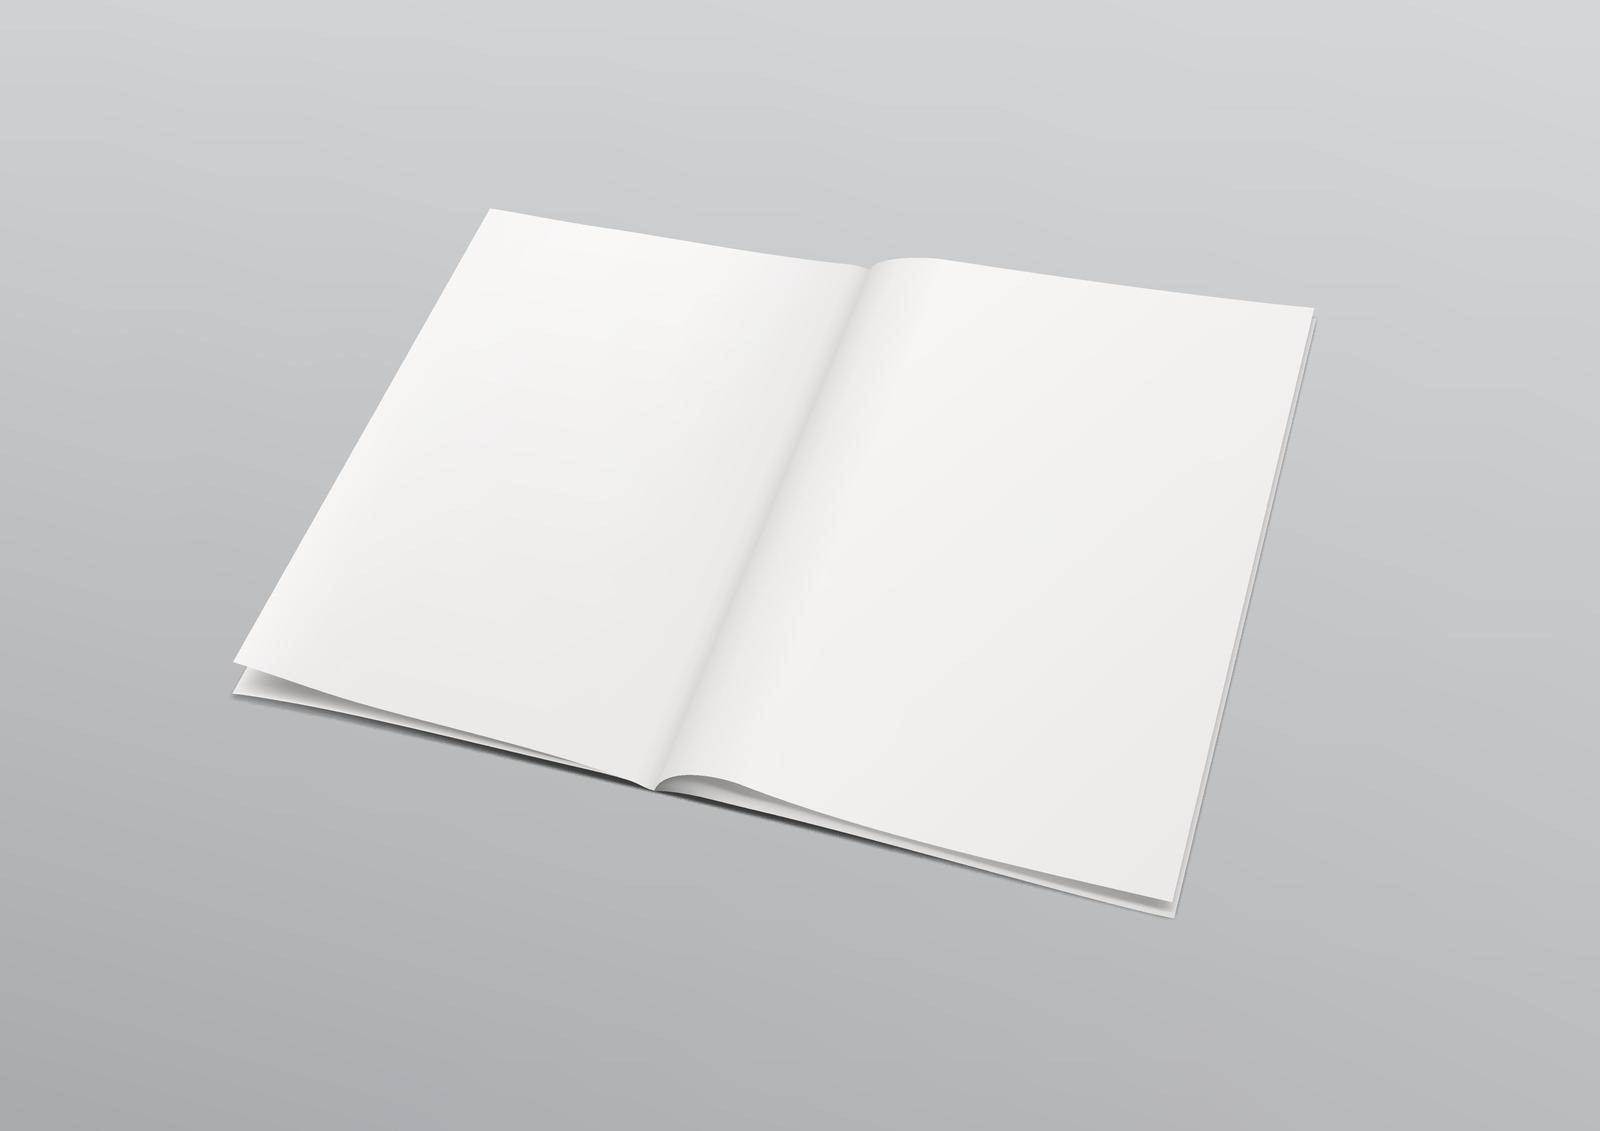 Clear Empty Opened Book With Copy Space Template by VectorThings